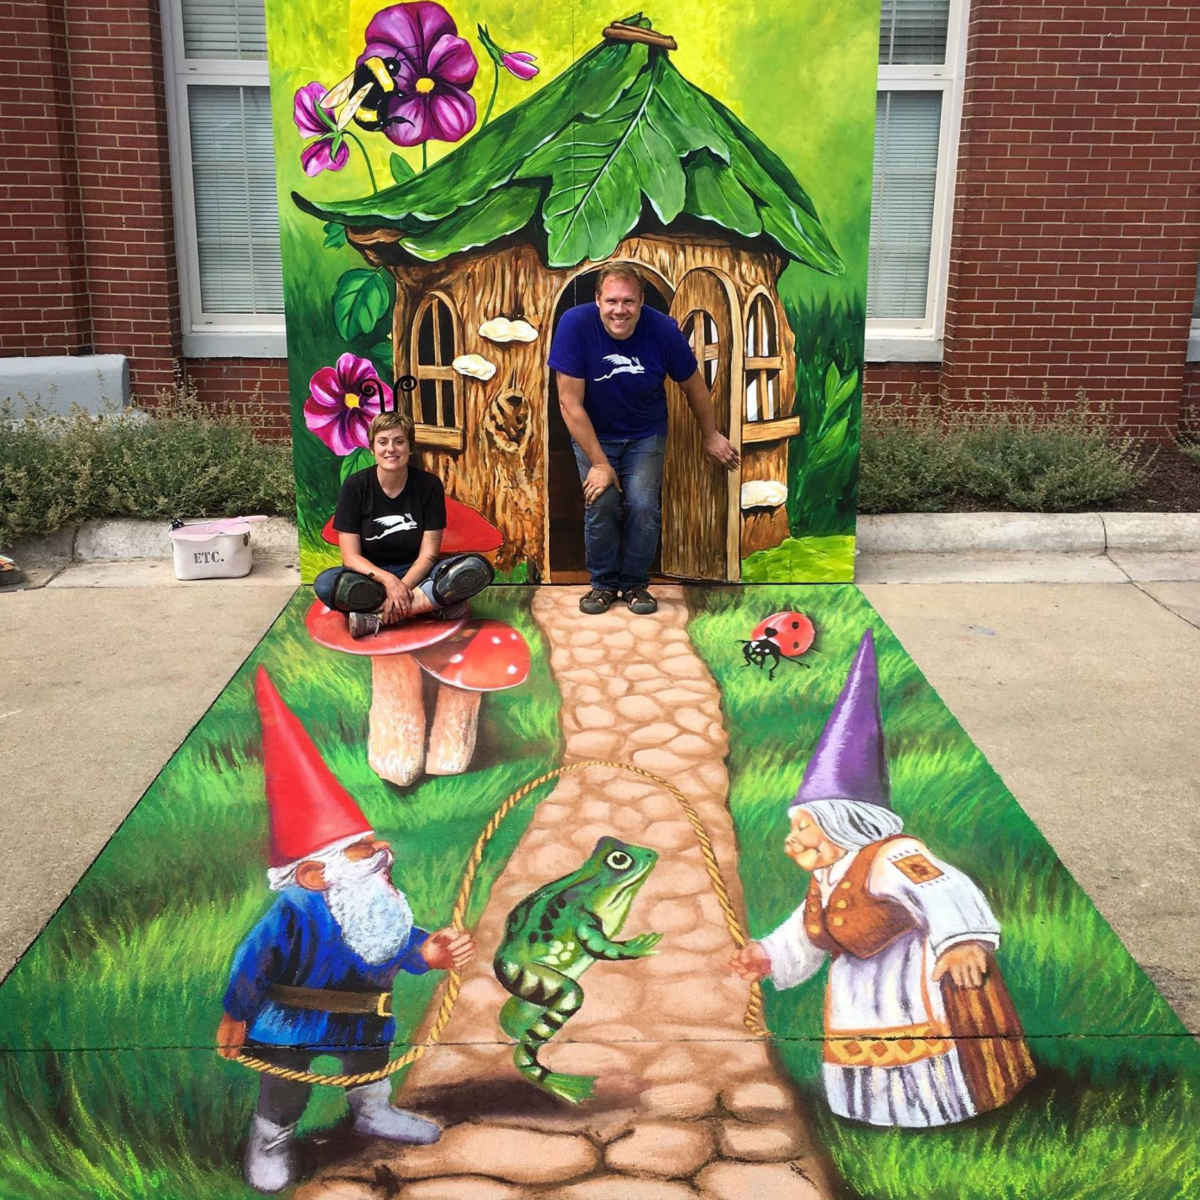 A Pigment of Your Imagination Michigan chalk artists, Dave Brenner